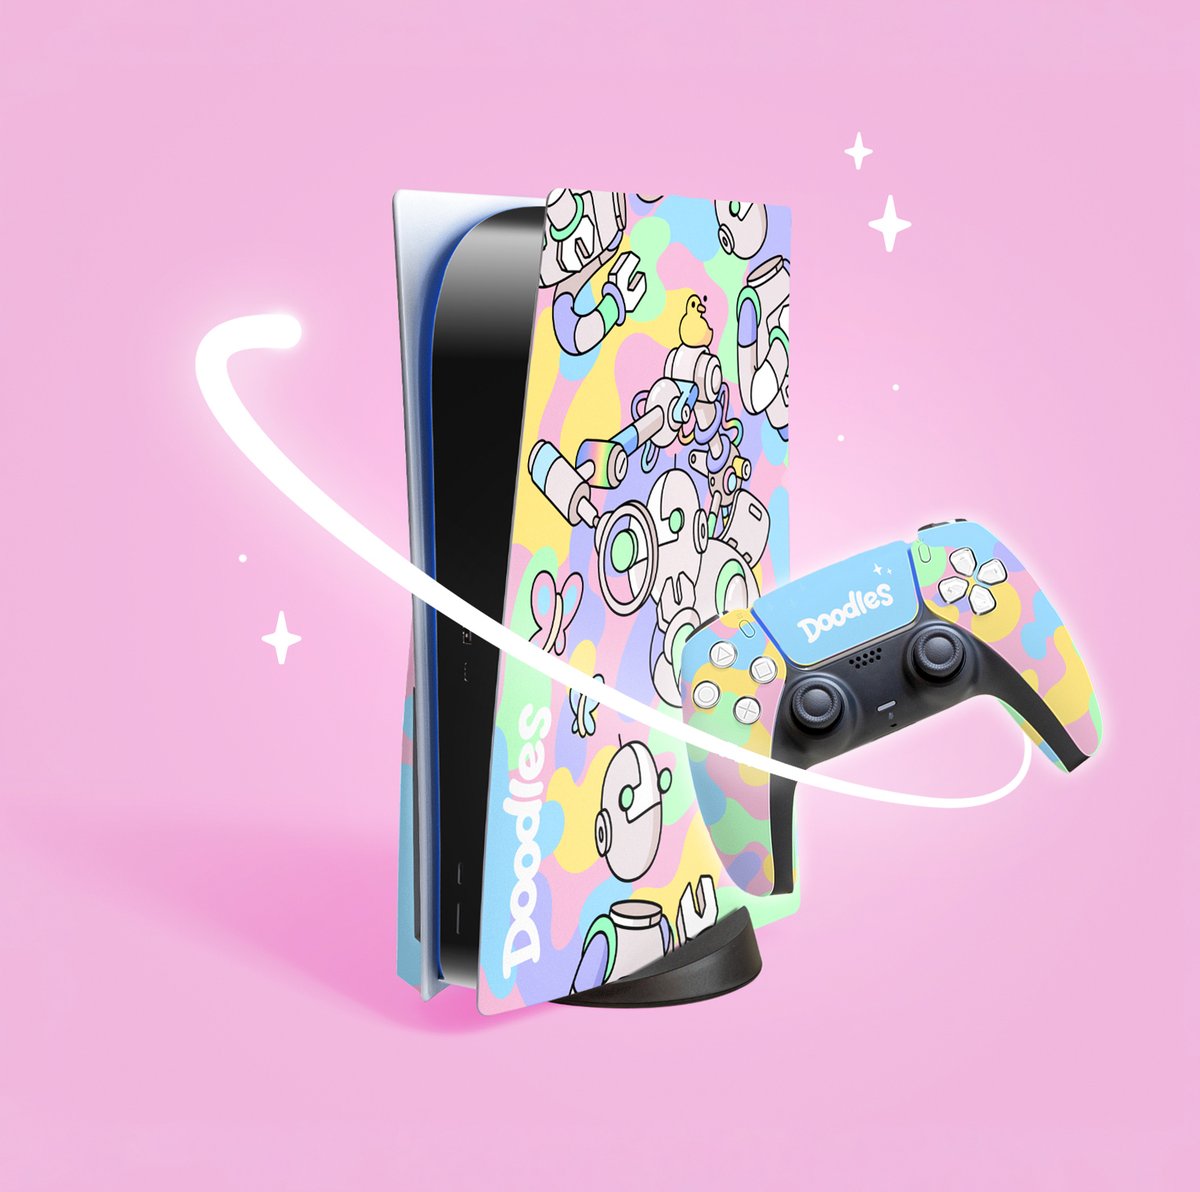 🚨🚨 Giveaway alert 🚨🚨 To celebrate Doodles' inaugural appearance at ComplexCon, we’re giving away an exclusive 1/1 PS5 designed by @burnttoast! To be in with a chance to win, head to the giveaway page for how to enter + terms & conditions: tropee.com/t/91JAAngU